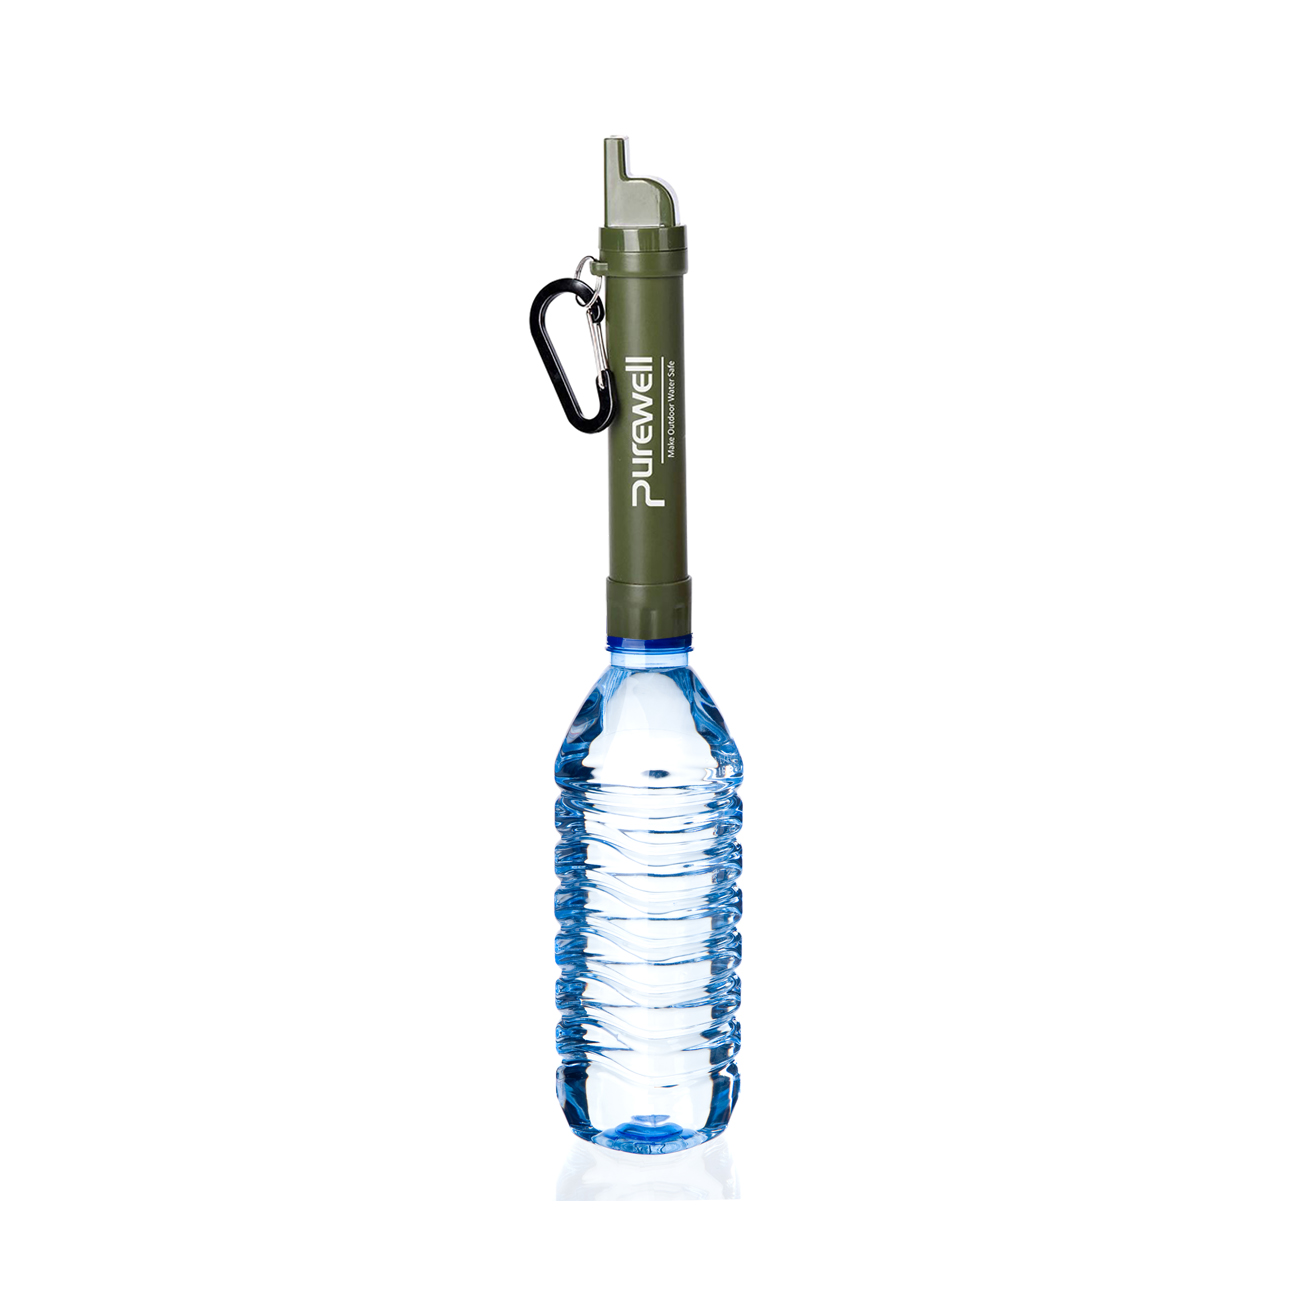 Purewell water purifier straw order now for traveling-2